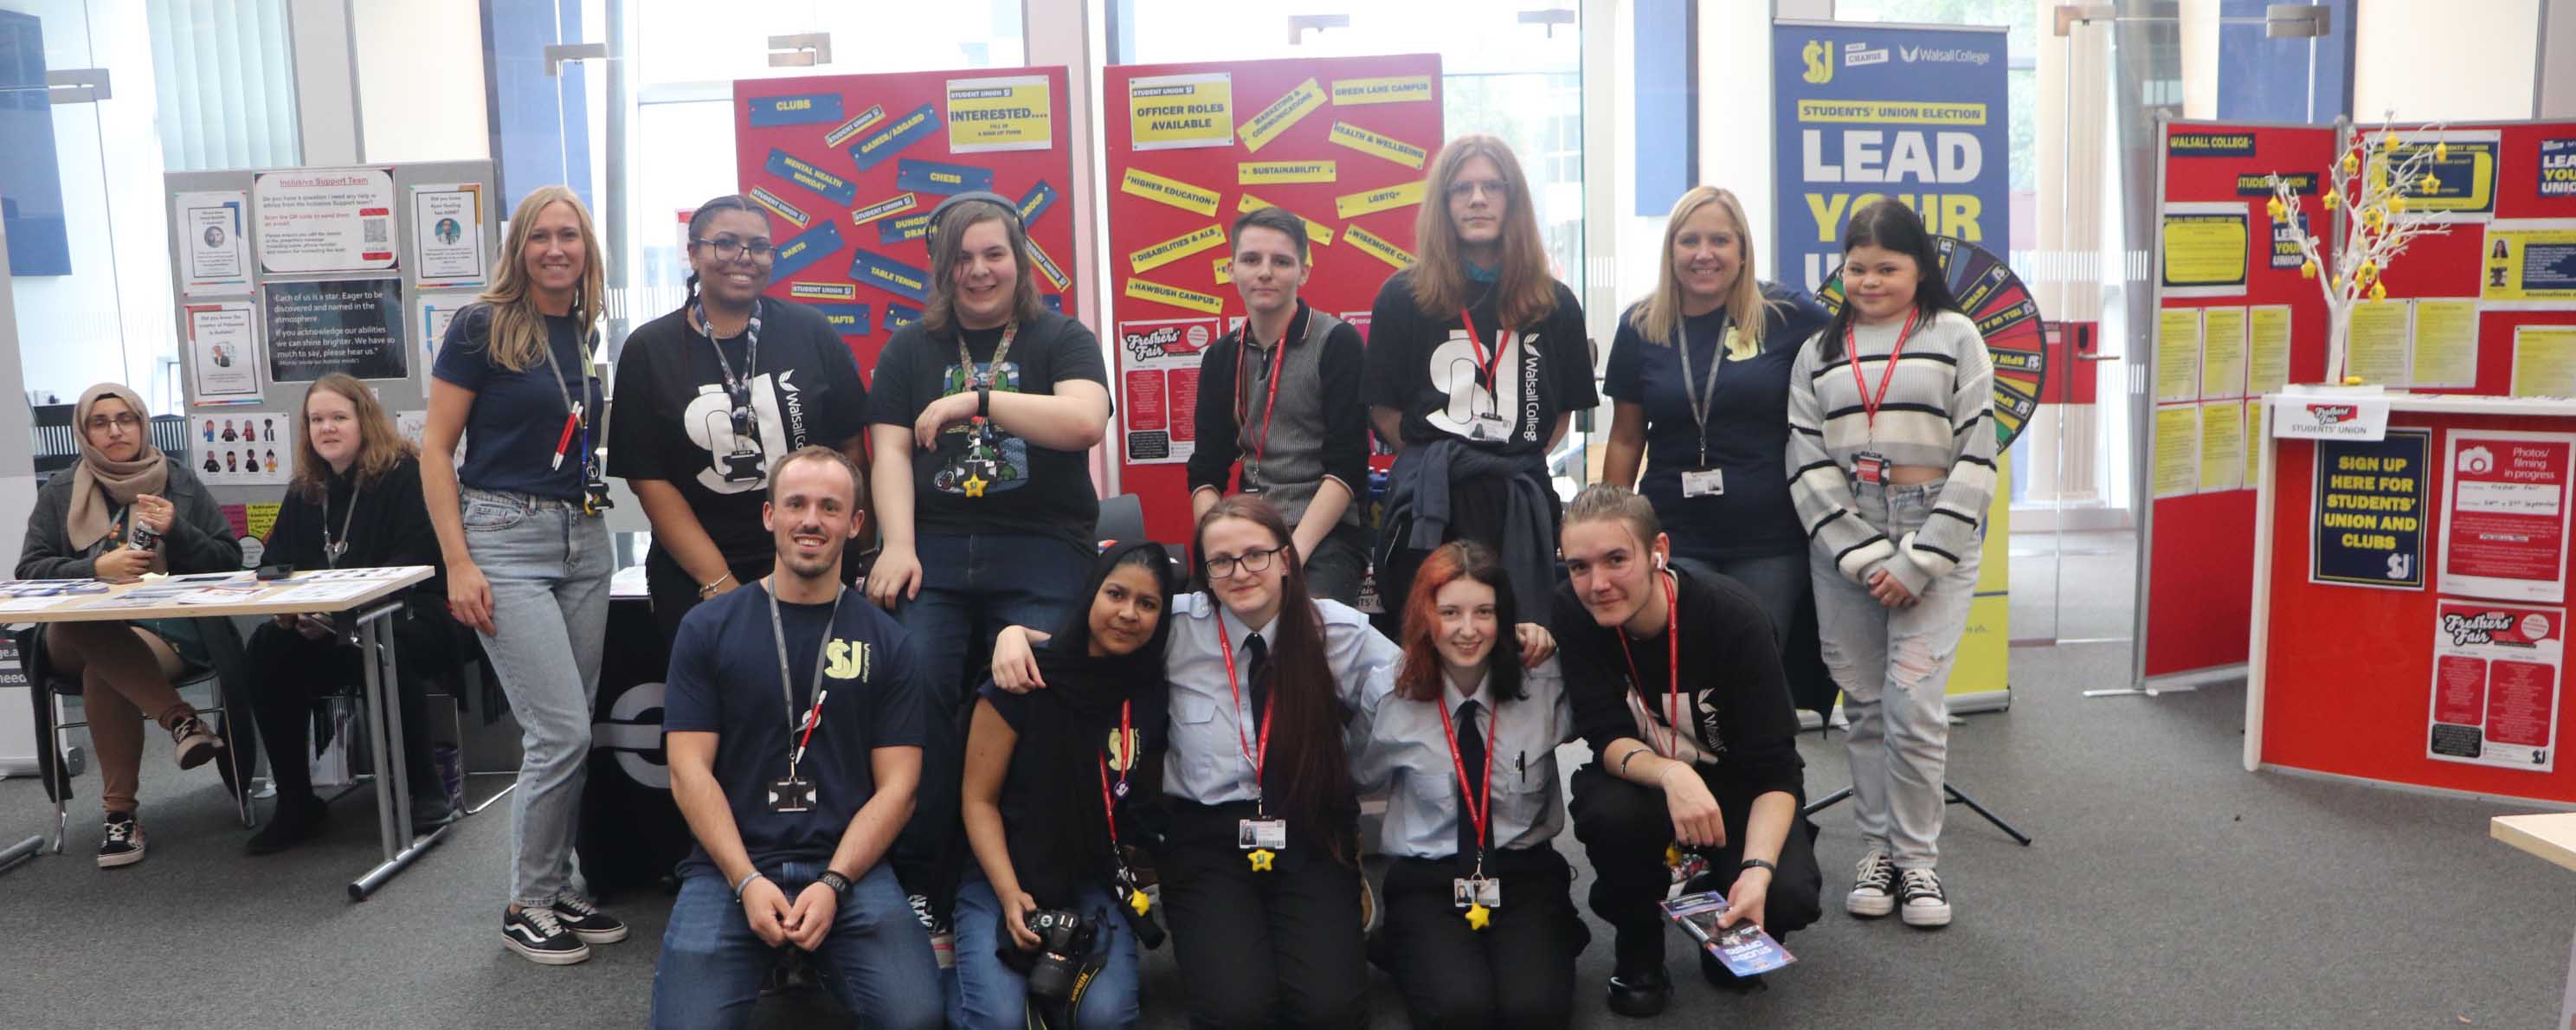 group shot of Students Union and Freshers Fair event team facing